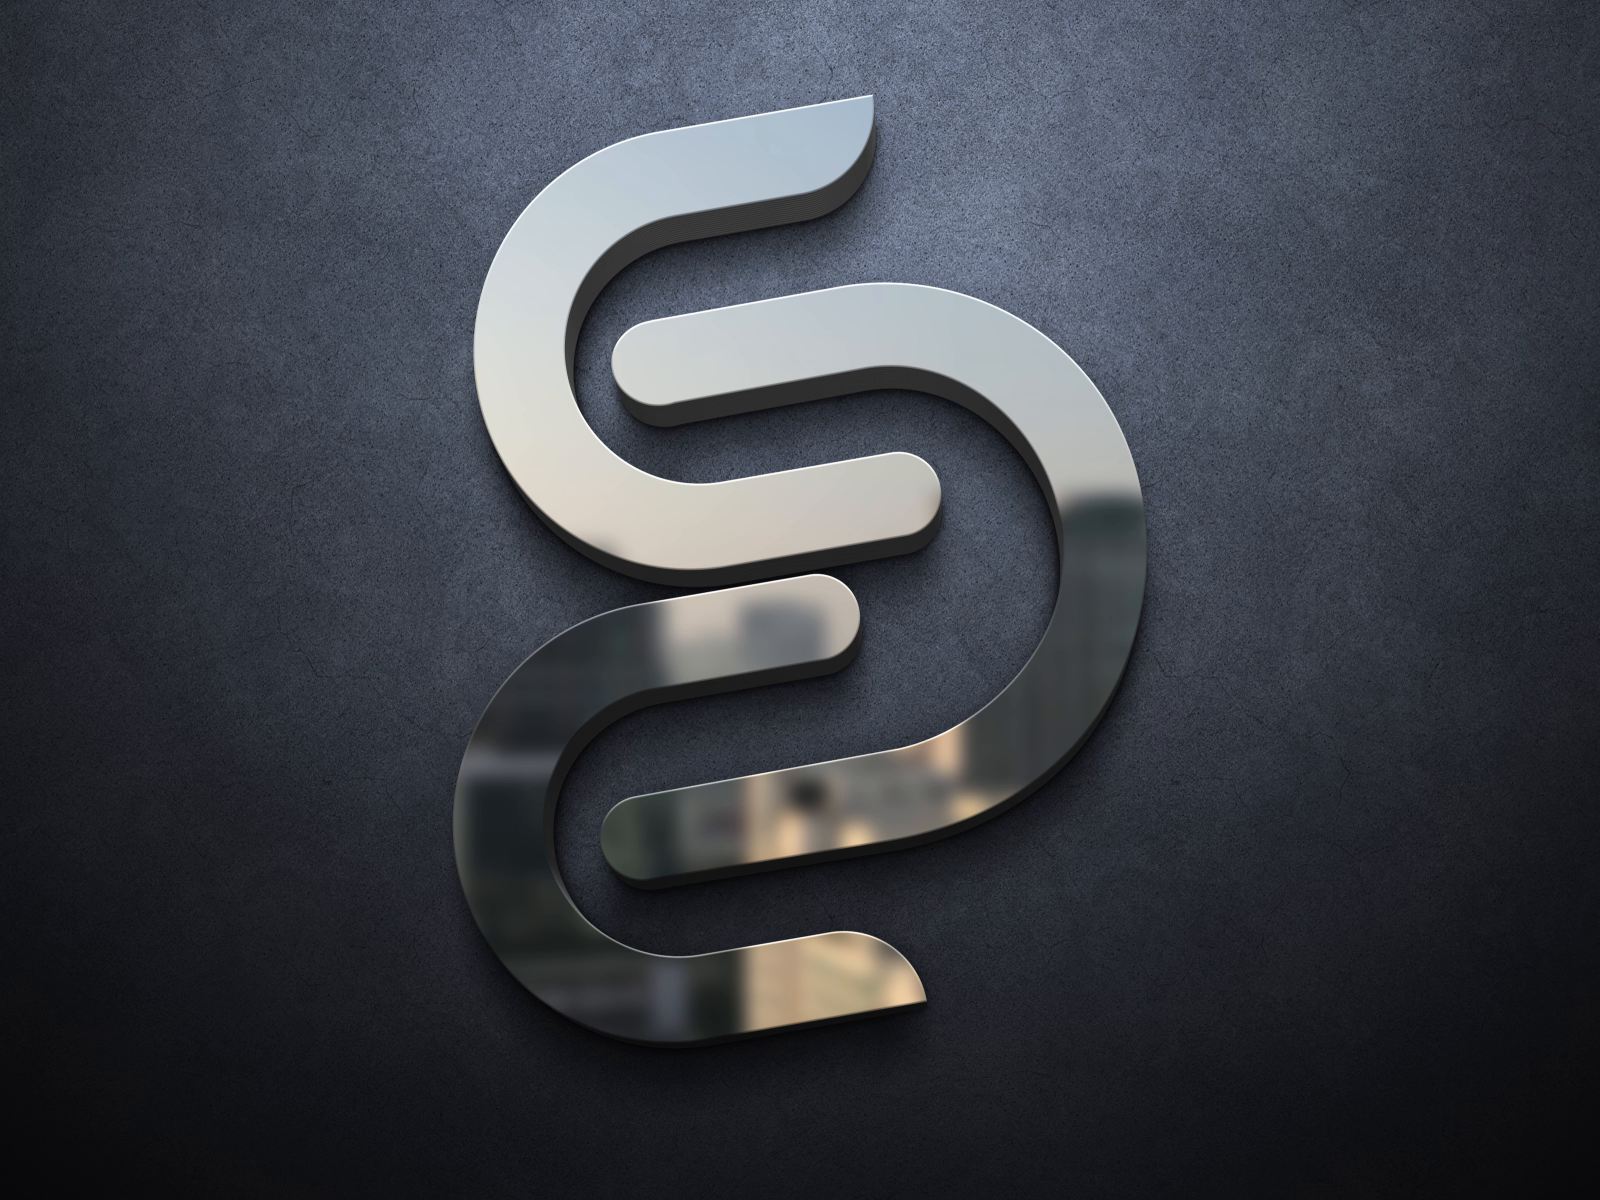 Logo Design by simplywebs on Dribbble